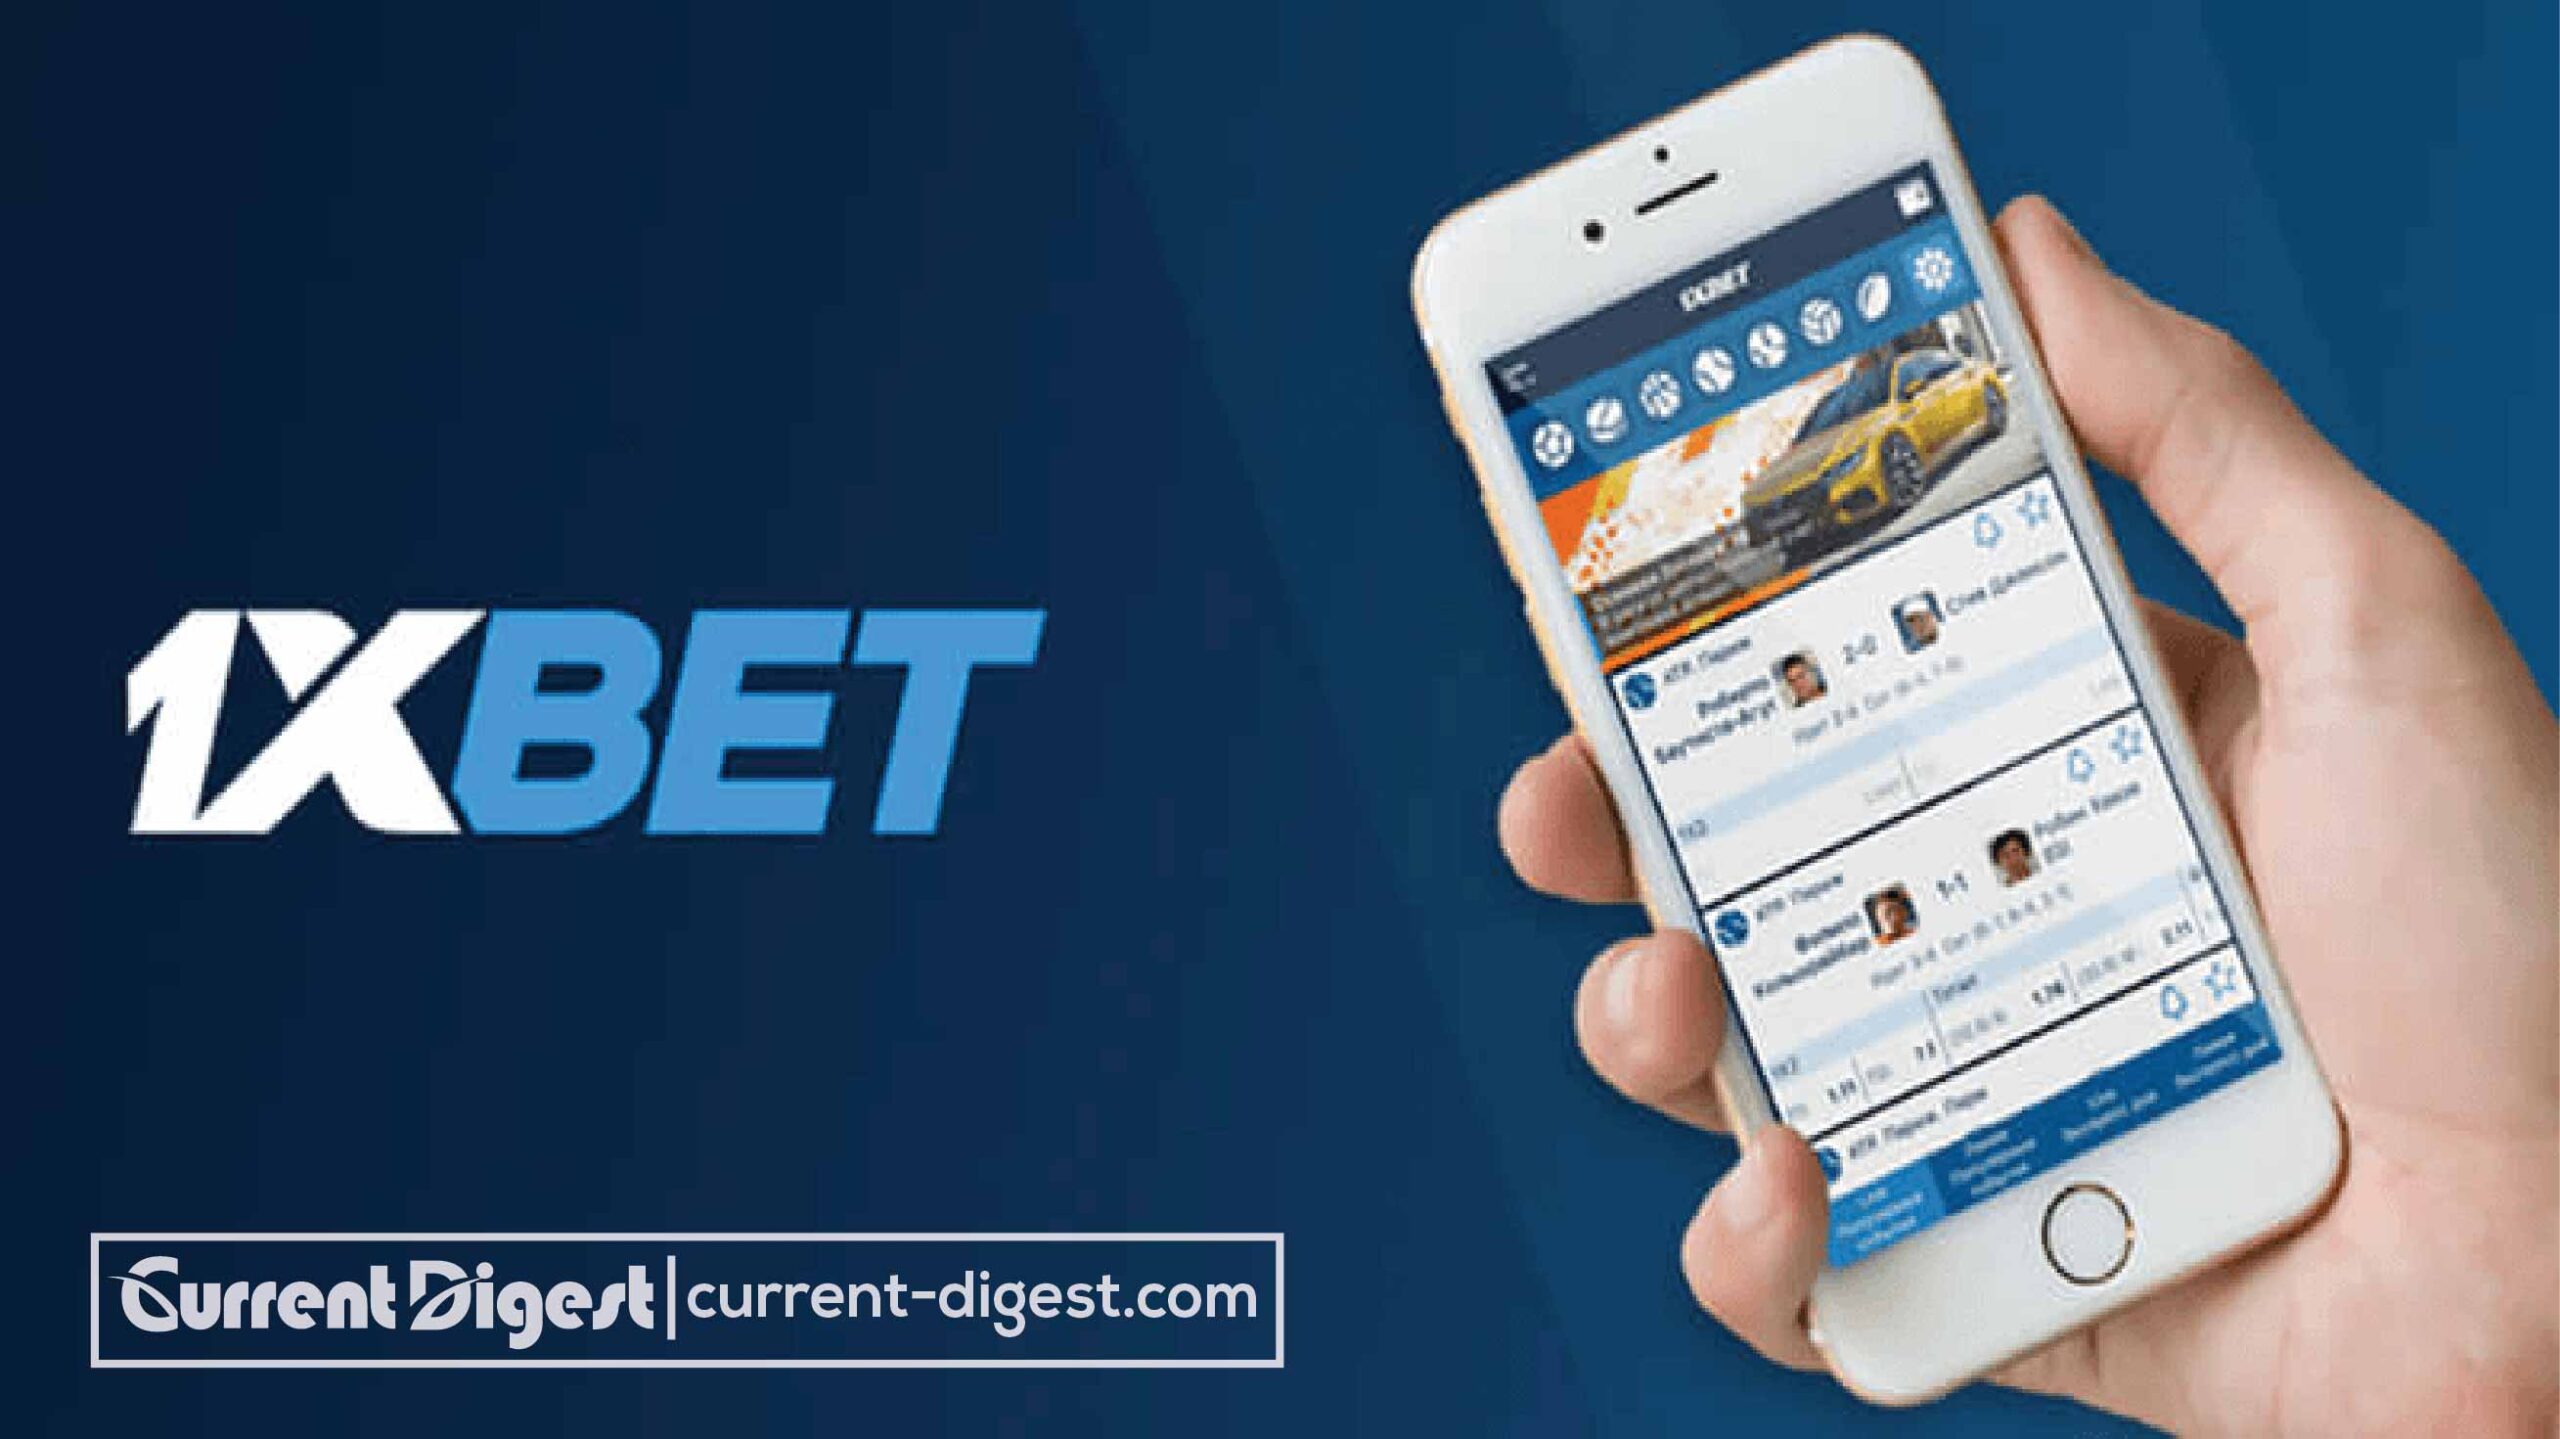 Join The Fun At 1xbet: The Top Casino Site In India For Thrilling Gaming Action